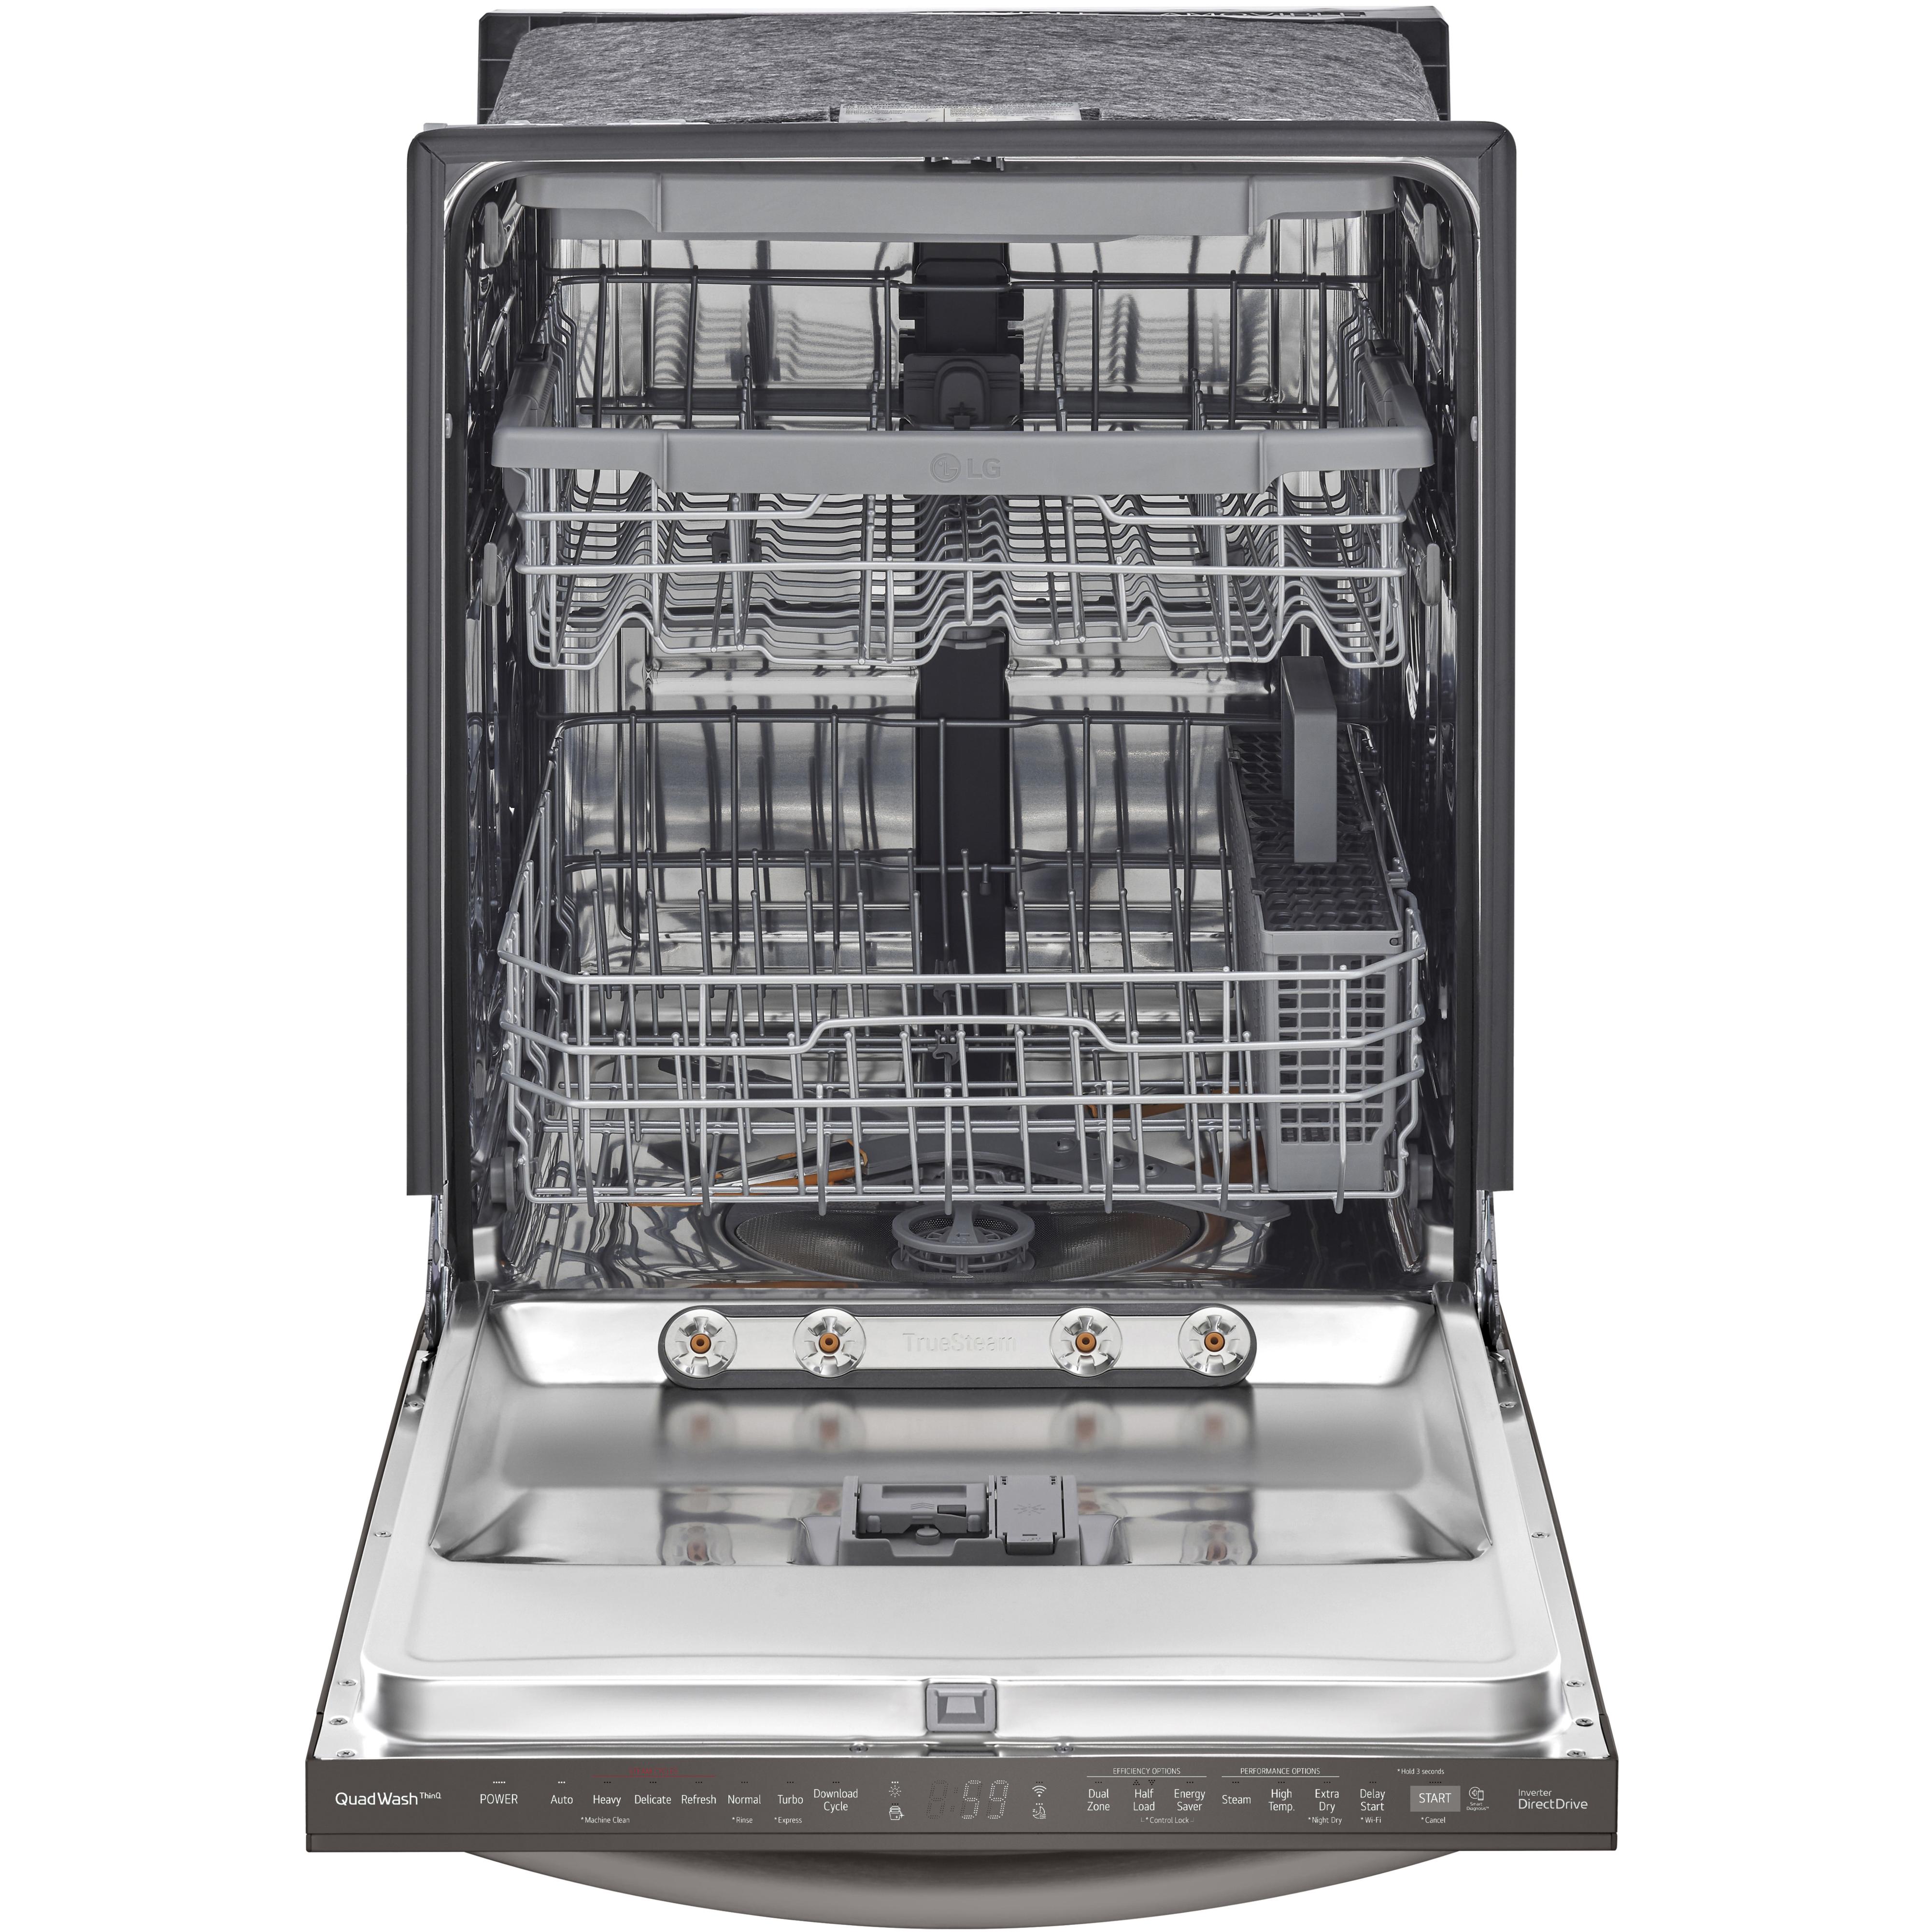 LG 24-inch Built-in Dishwasher with TrueSteam? LDTS5552D